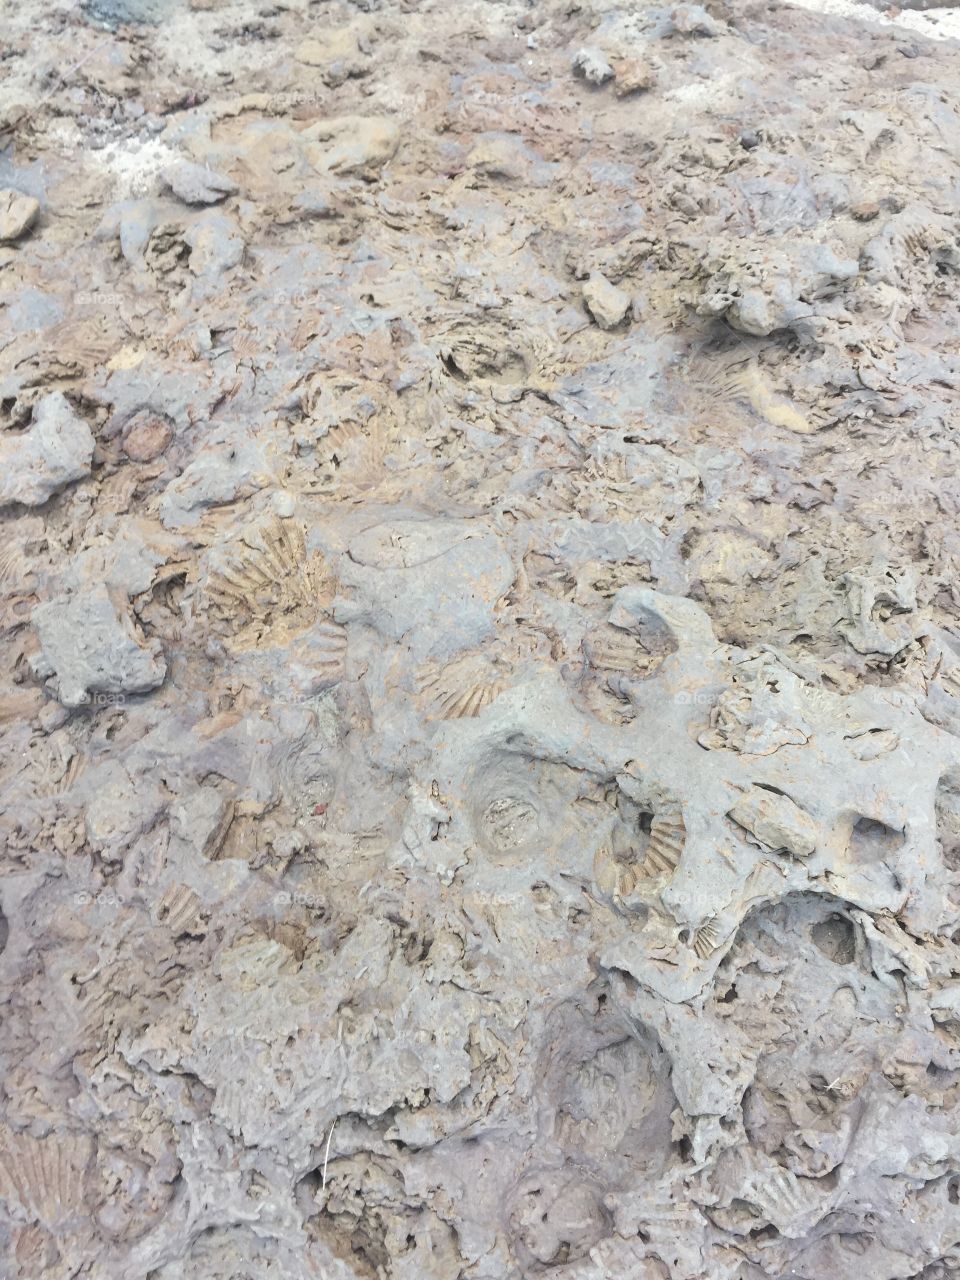 Fossil shell imprints in rock